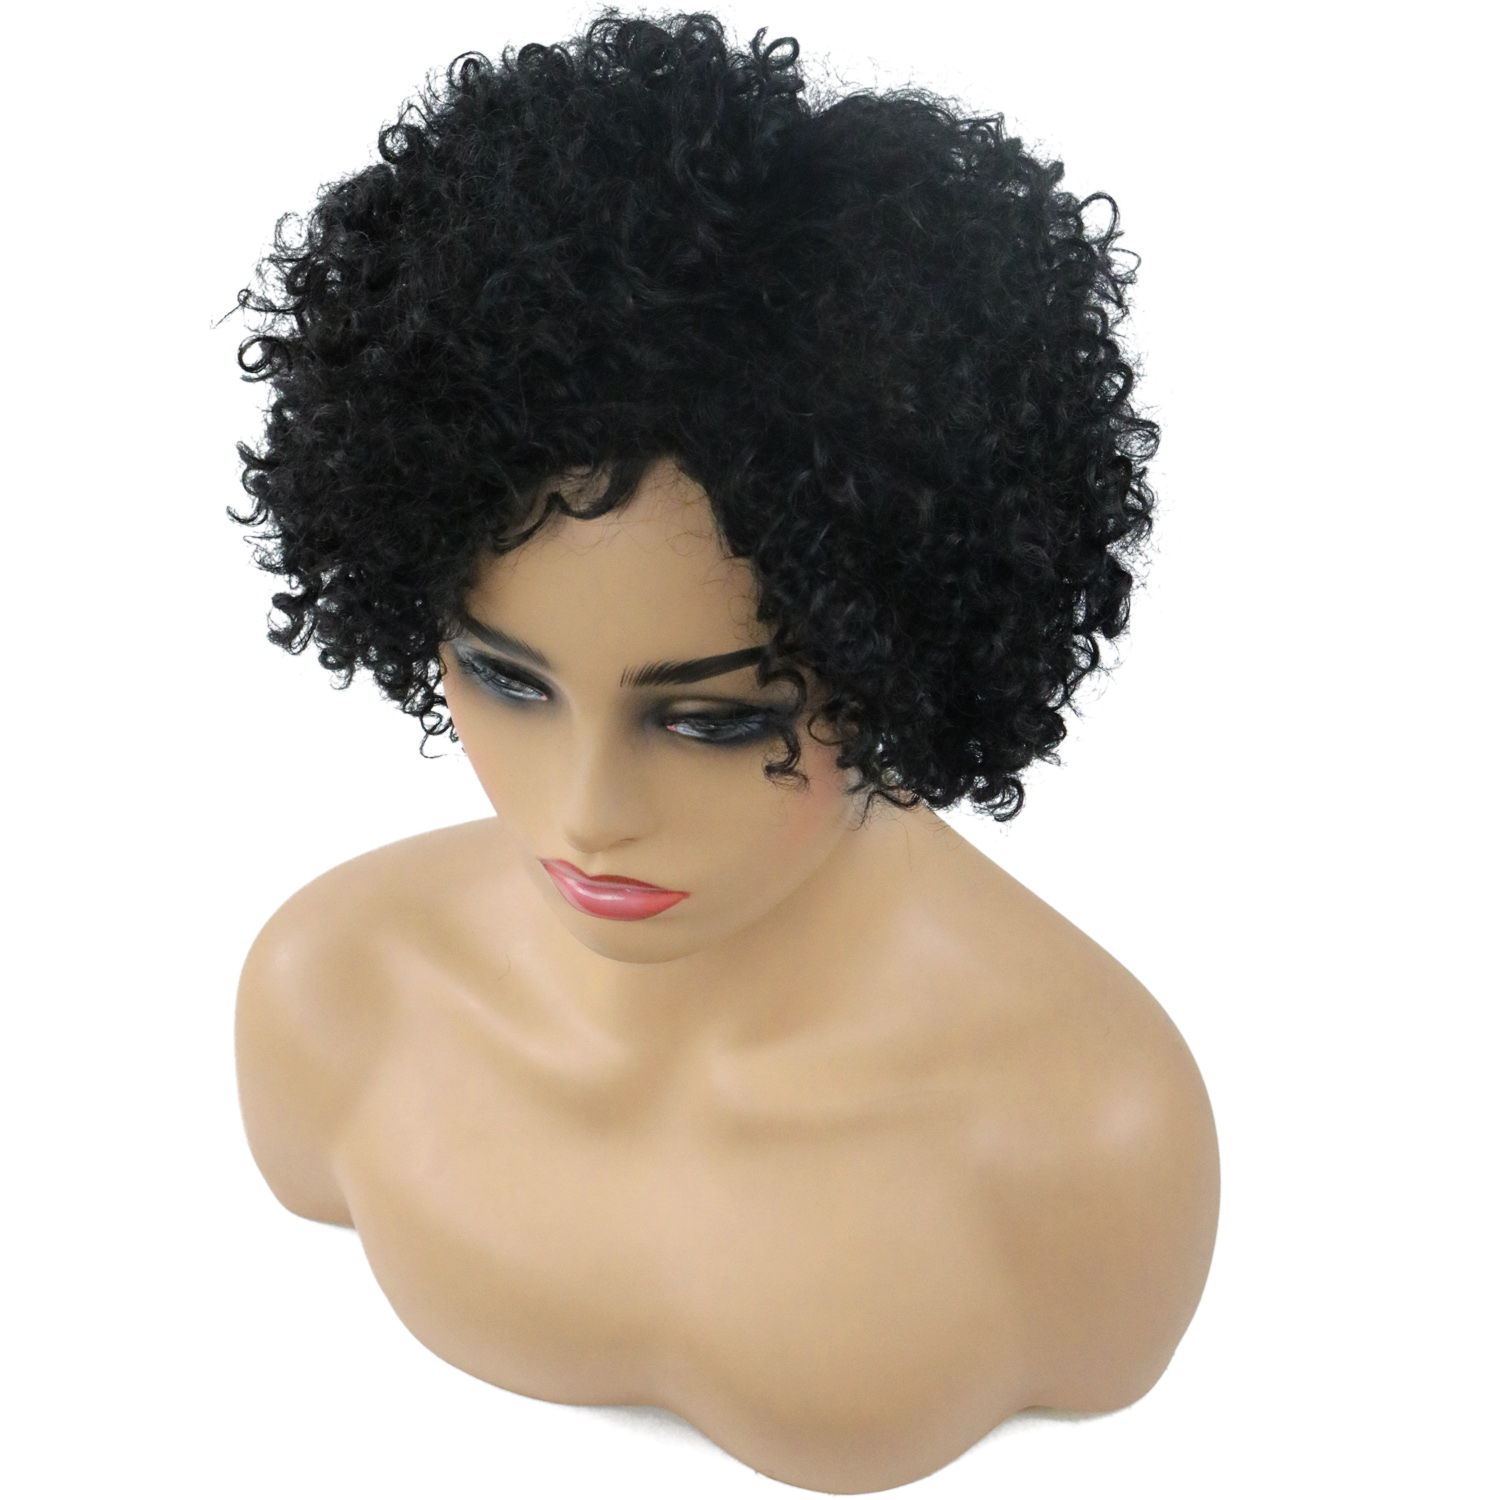 Kinky Curly Medium Synthetic Hair African American For Black Women Wig